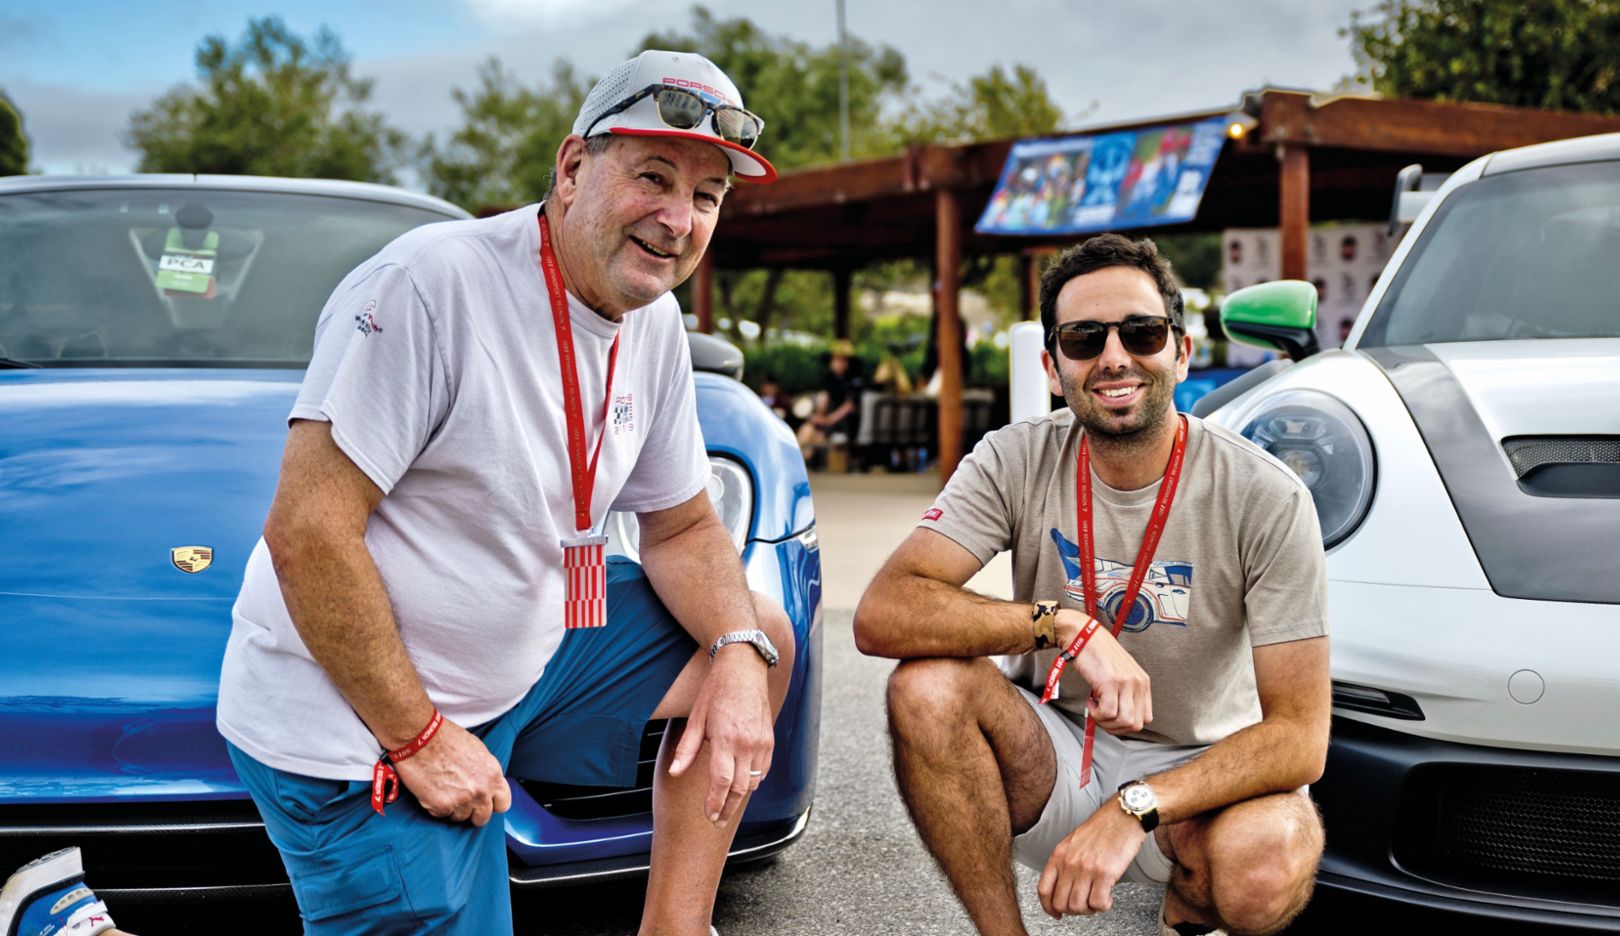 “We feel like we’re part of a family with Porsche. This year, we were given the opportunity to be with the Porsche people all night in Le Mans – a once-in-a-lifetime experience.” Hank and Jonathan BERNBAUM